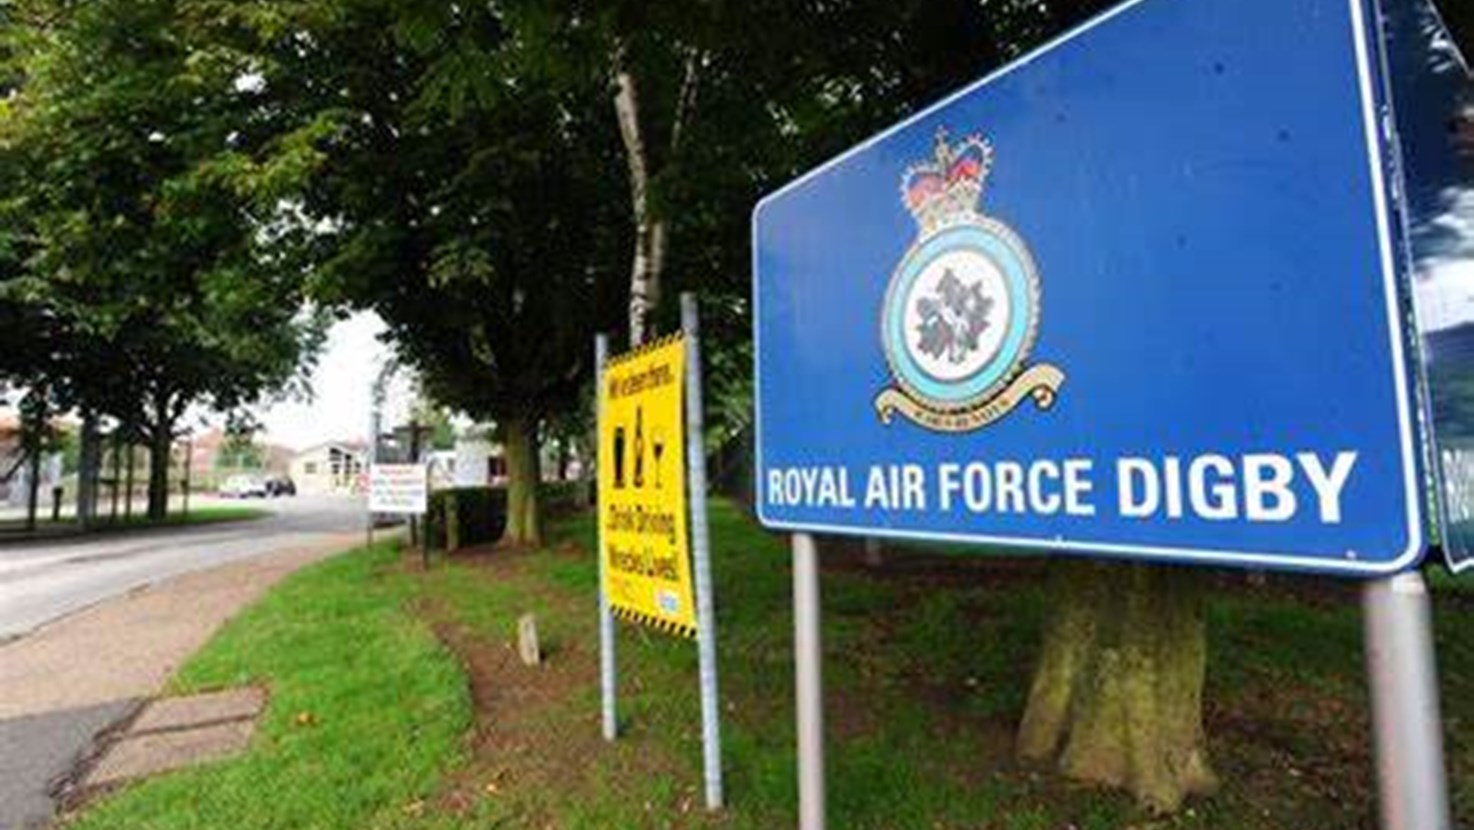 View all of the events and meetings that PCC Marc Jones attended or hosted at RAF Digby in 2022